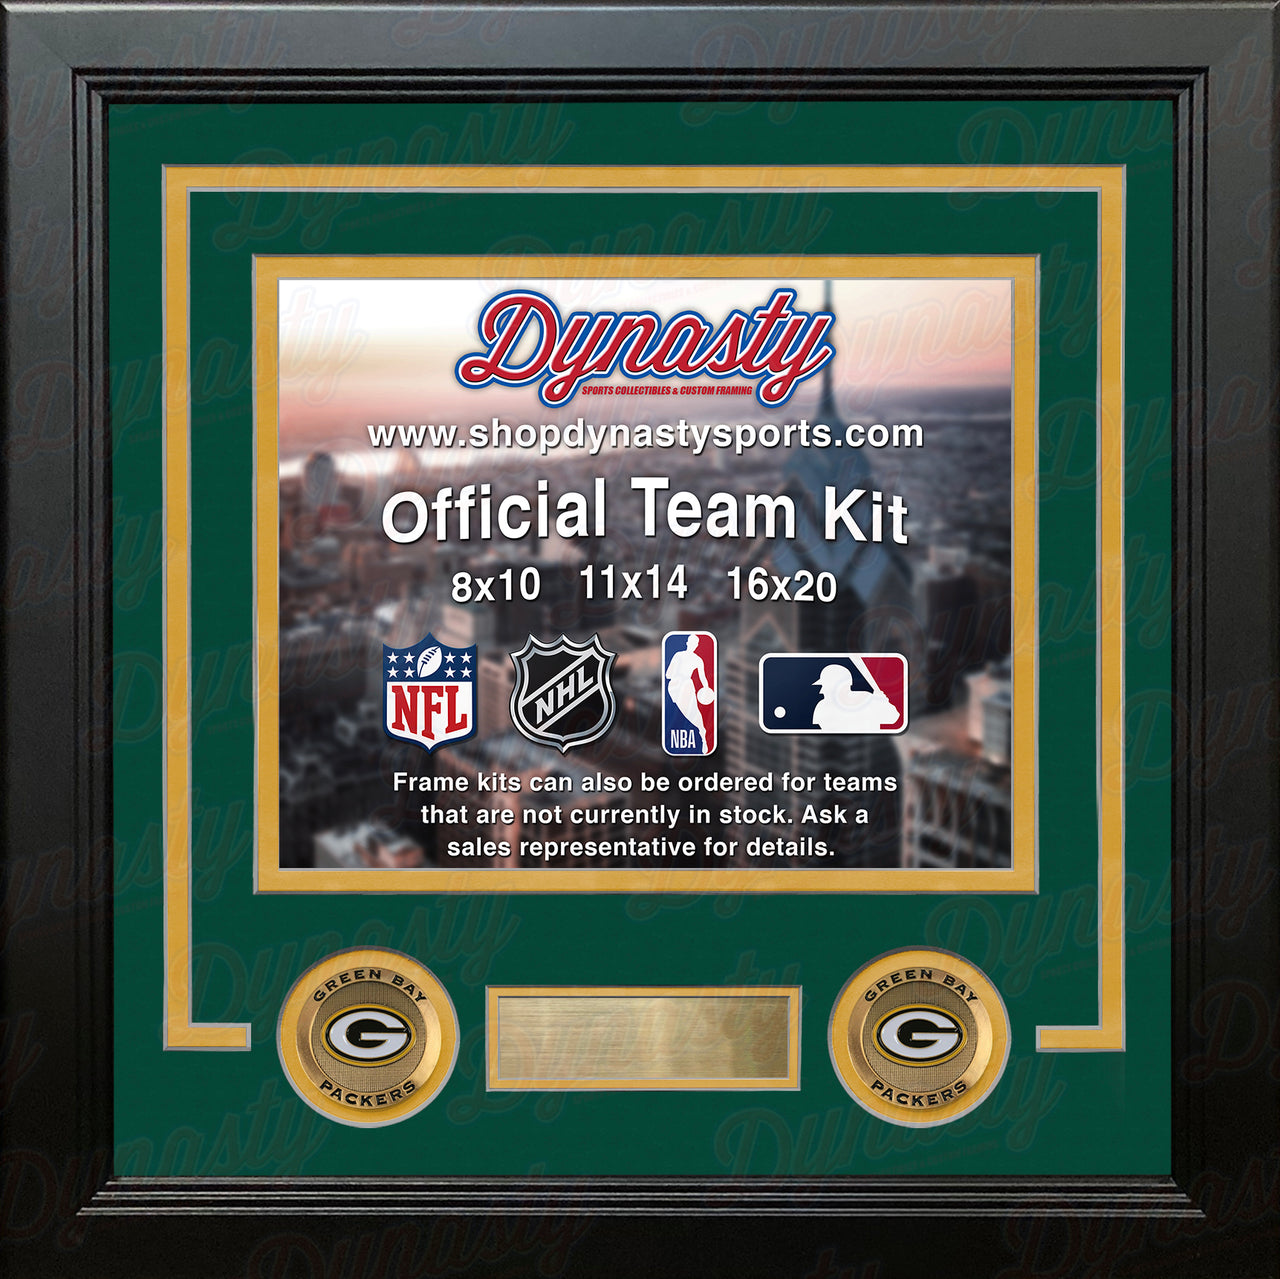 NFL Football Photo Picture Frame Kit - Green Bay Packers (Green Matting, Yellow Trim) - Dynasty Sports & Framing 